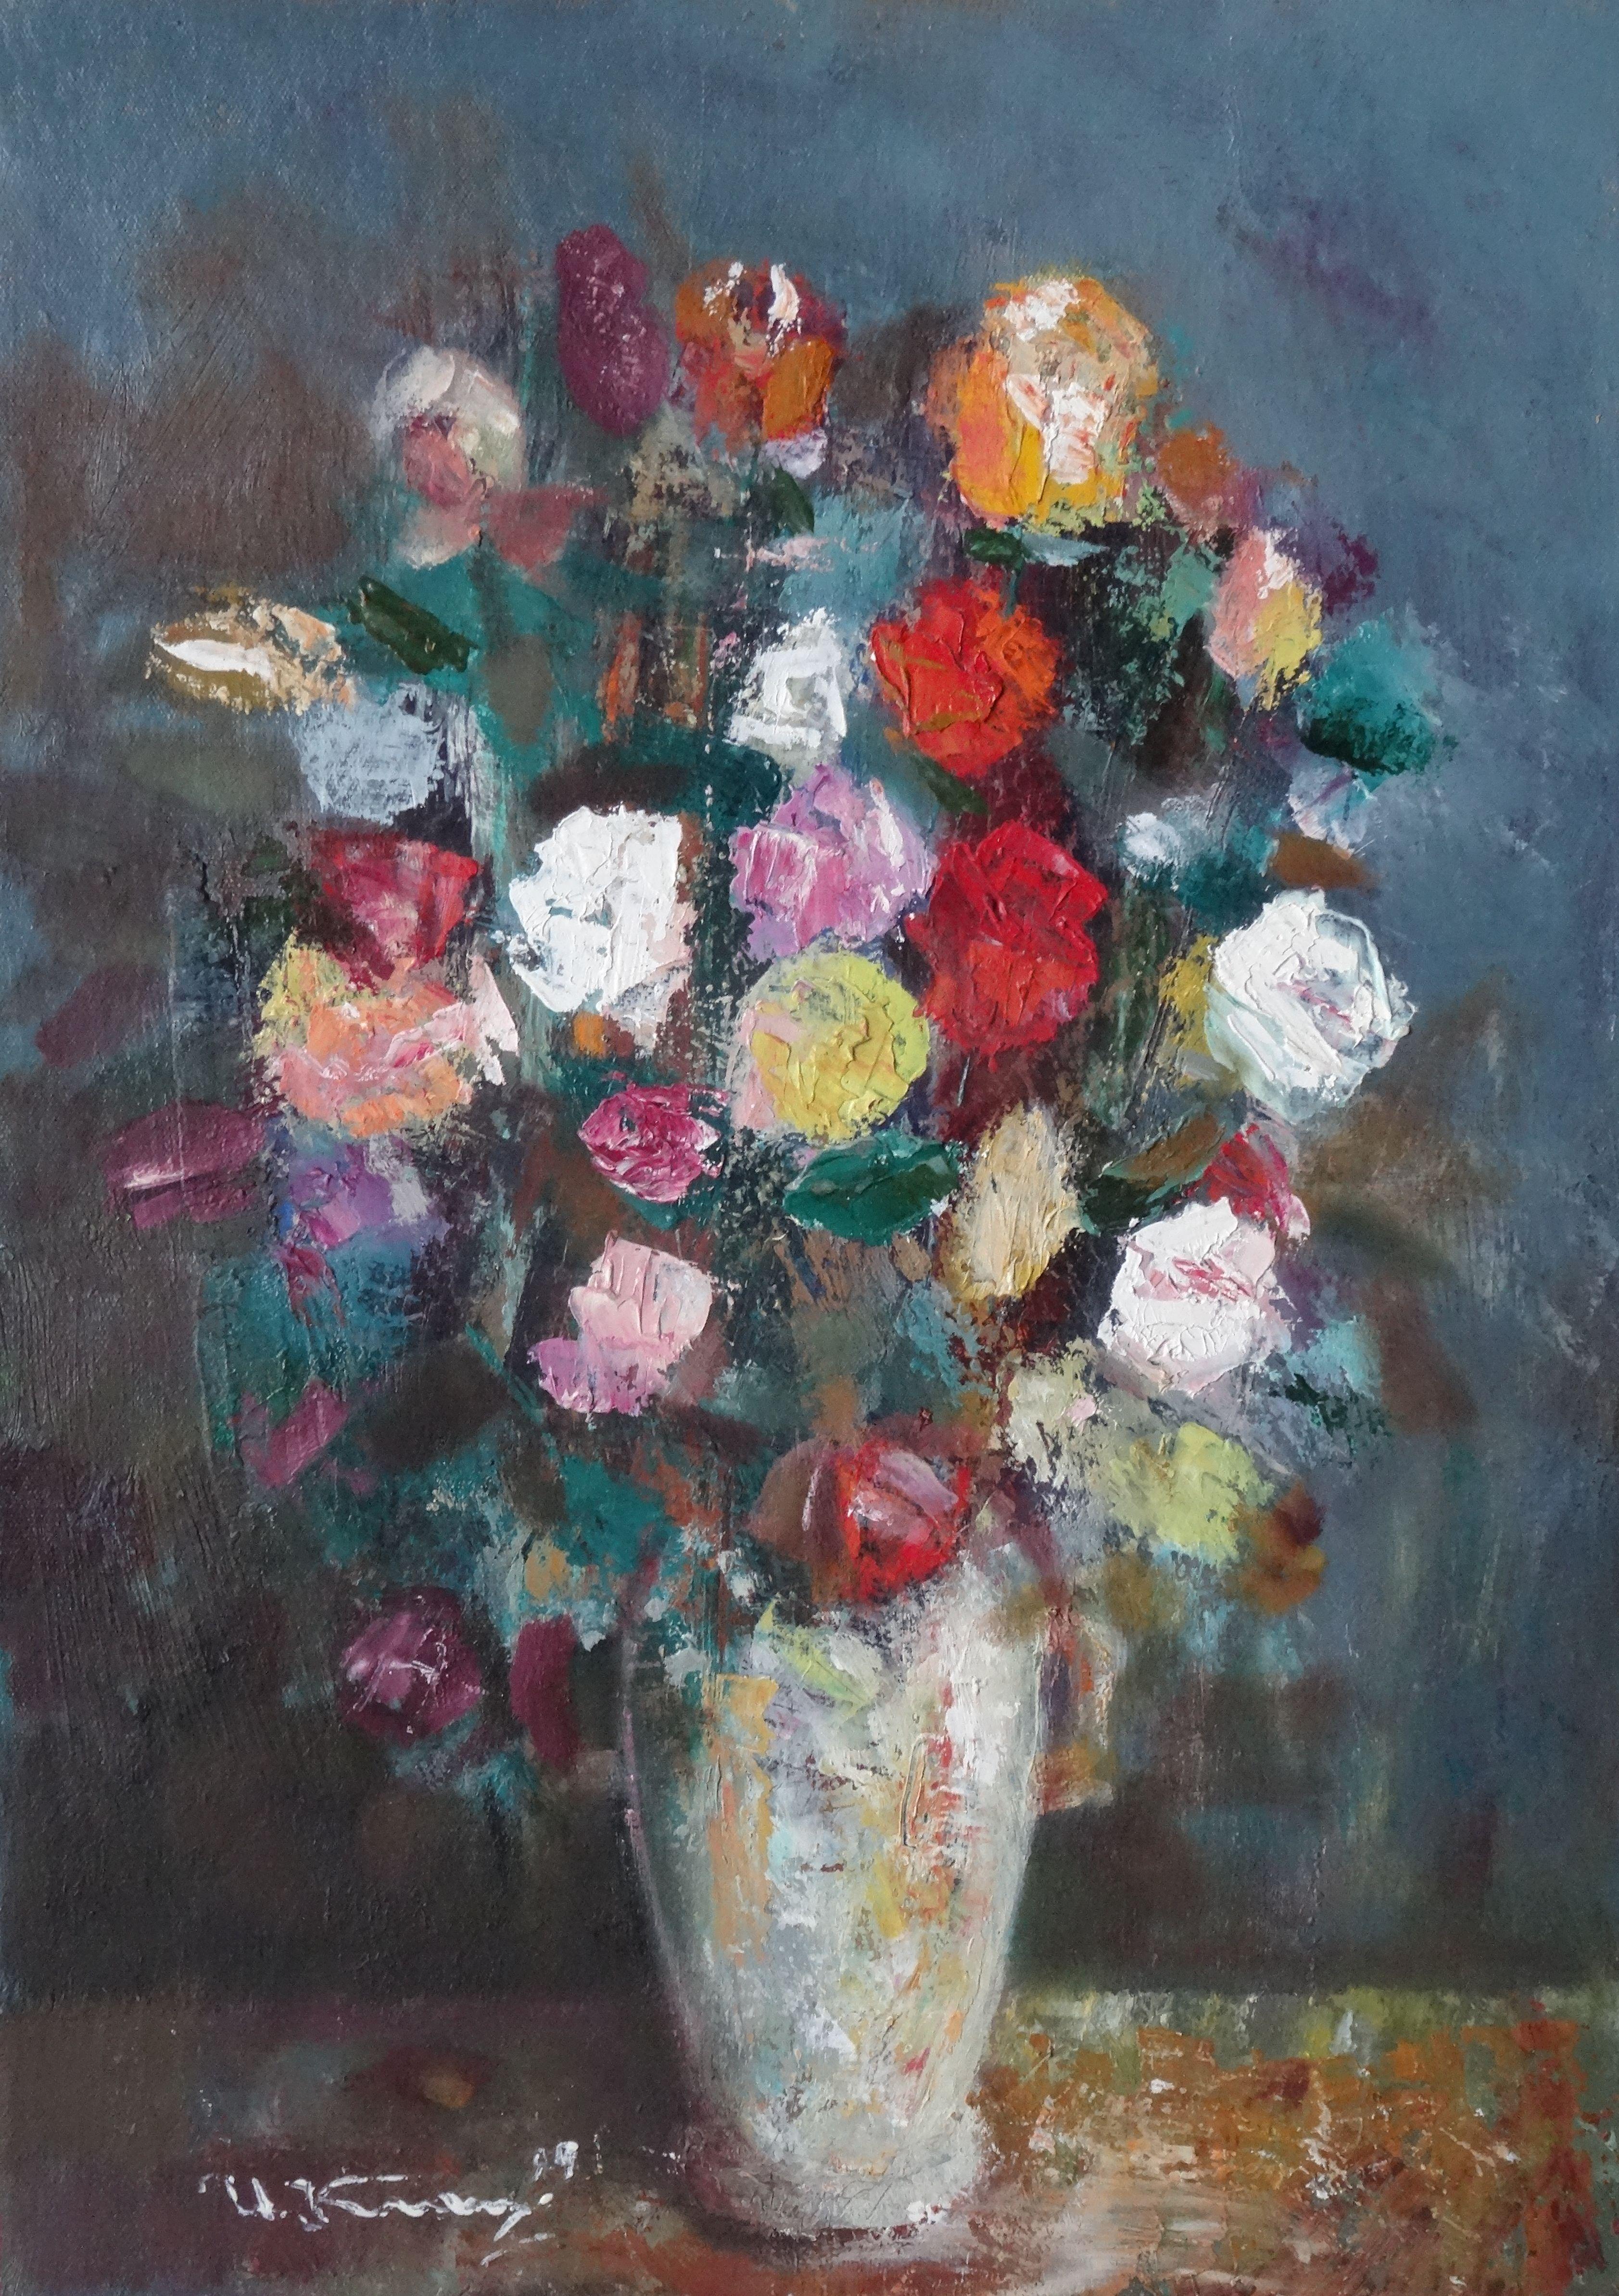 Uldis Krauze Abstract Painting - Flowers in a vase. Oil on cardboard, 51x36 cm